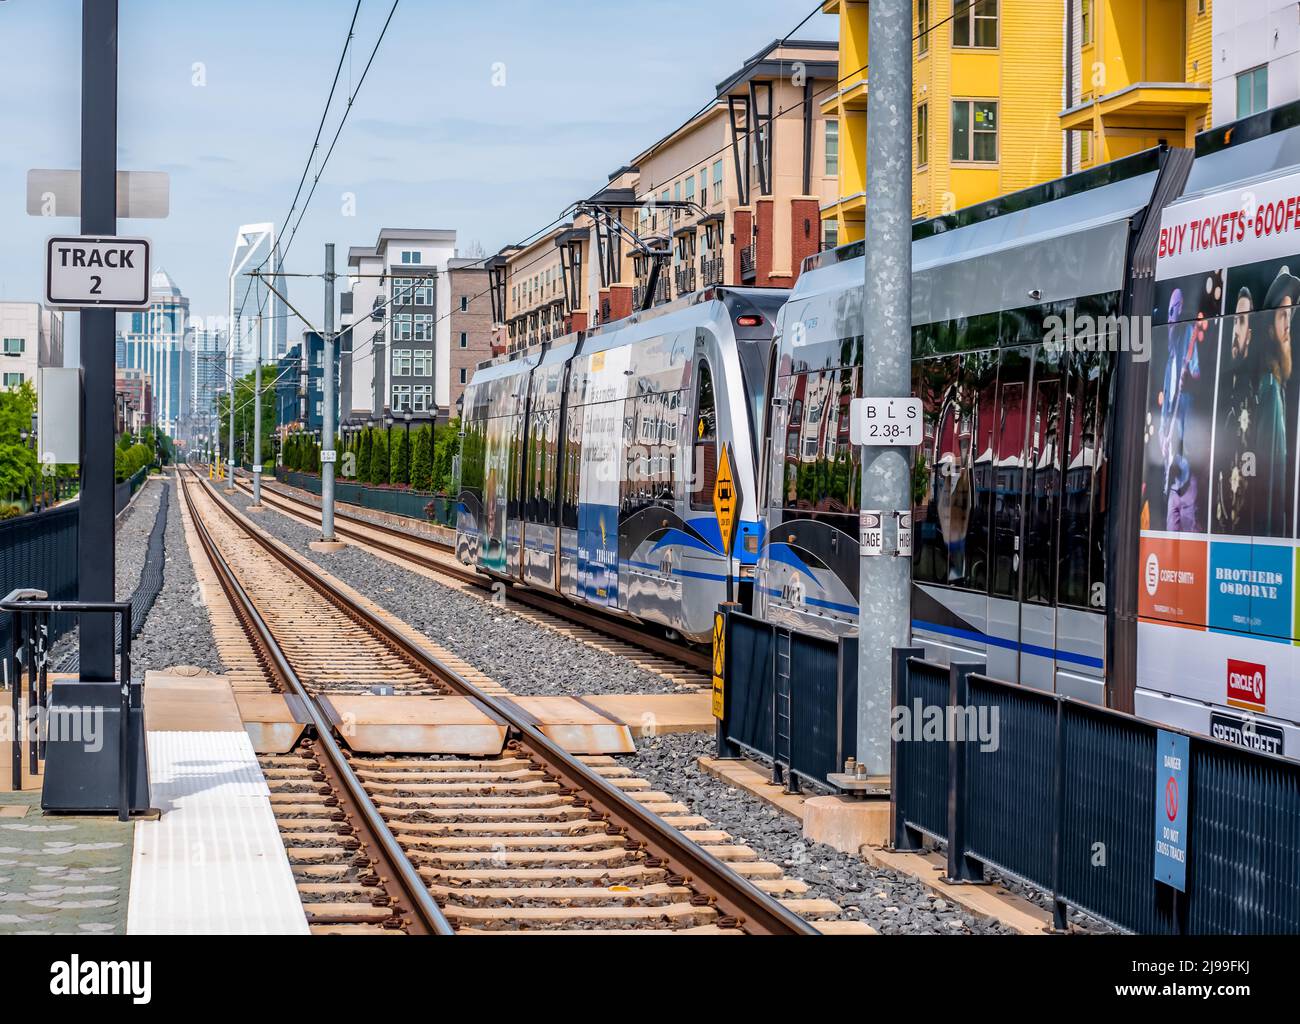 Lynx Blue Line commuter train heading into uptown Charlotte, North Carolina showing high rise buildings, apartment buildings and train tracks. Stock Photo